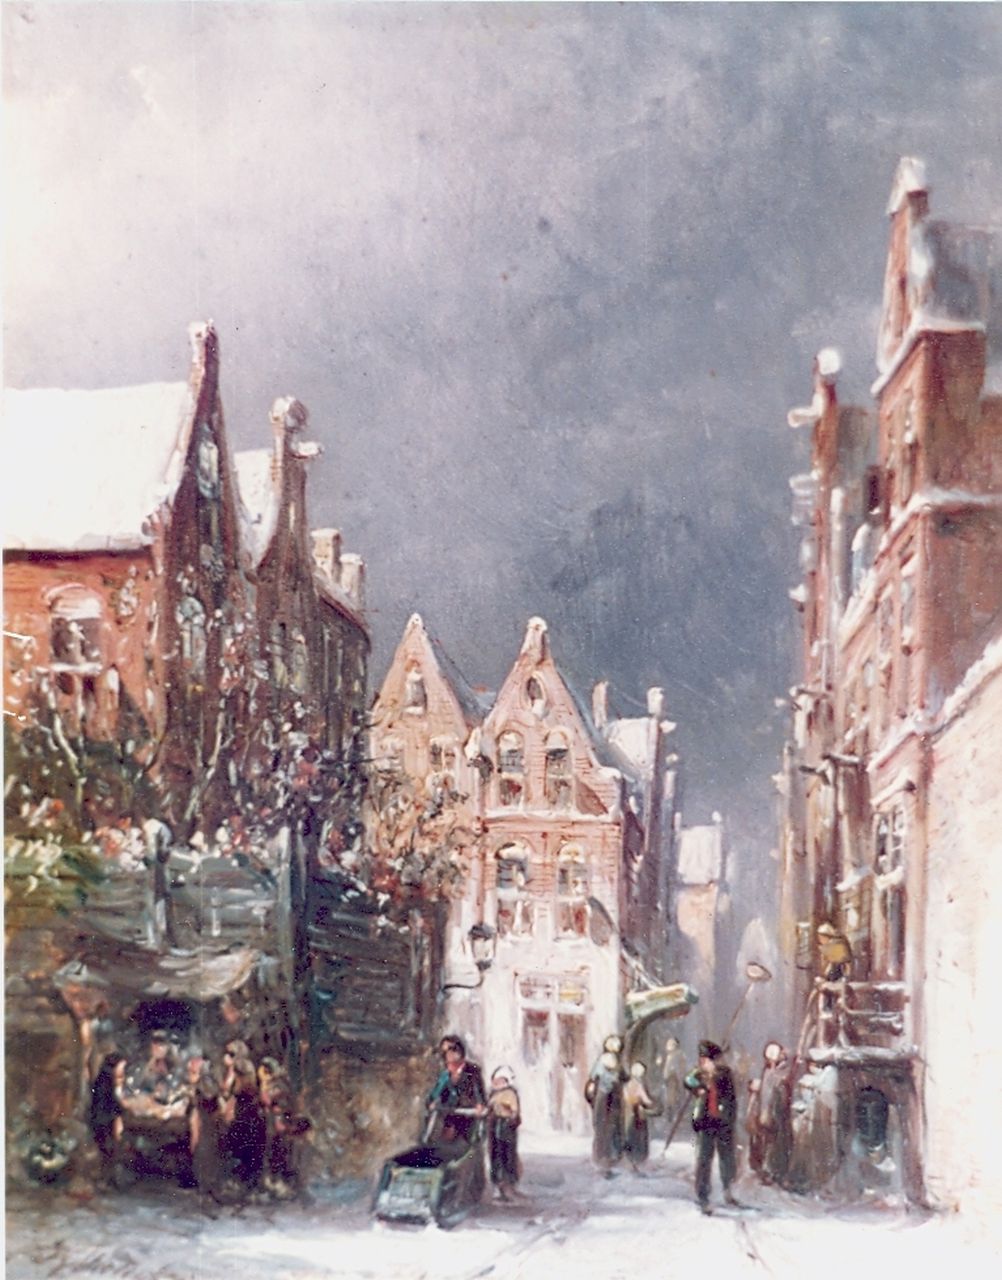 Vertin P.G.  | Petrus Gerardus Vertin, A snowy Dutch town, oil on panel 20.0 x 15.0 cm, signed l.l. and dated '87